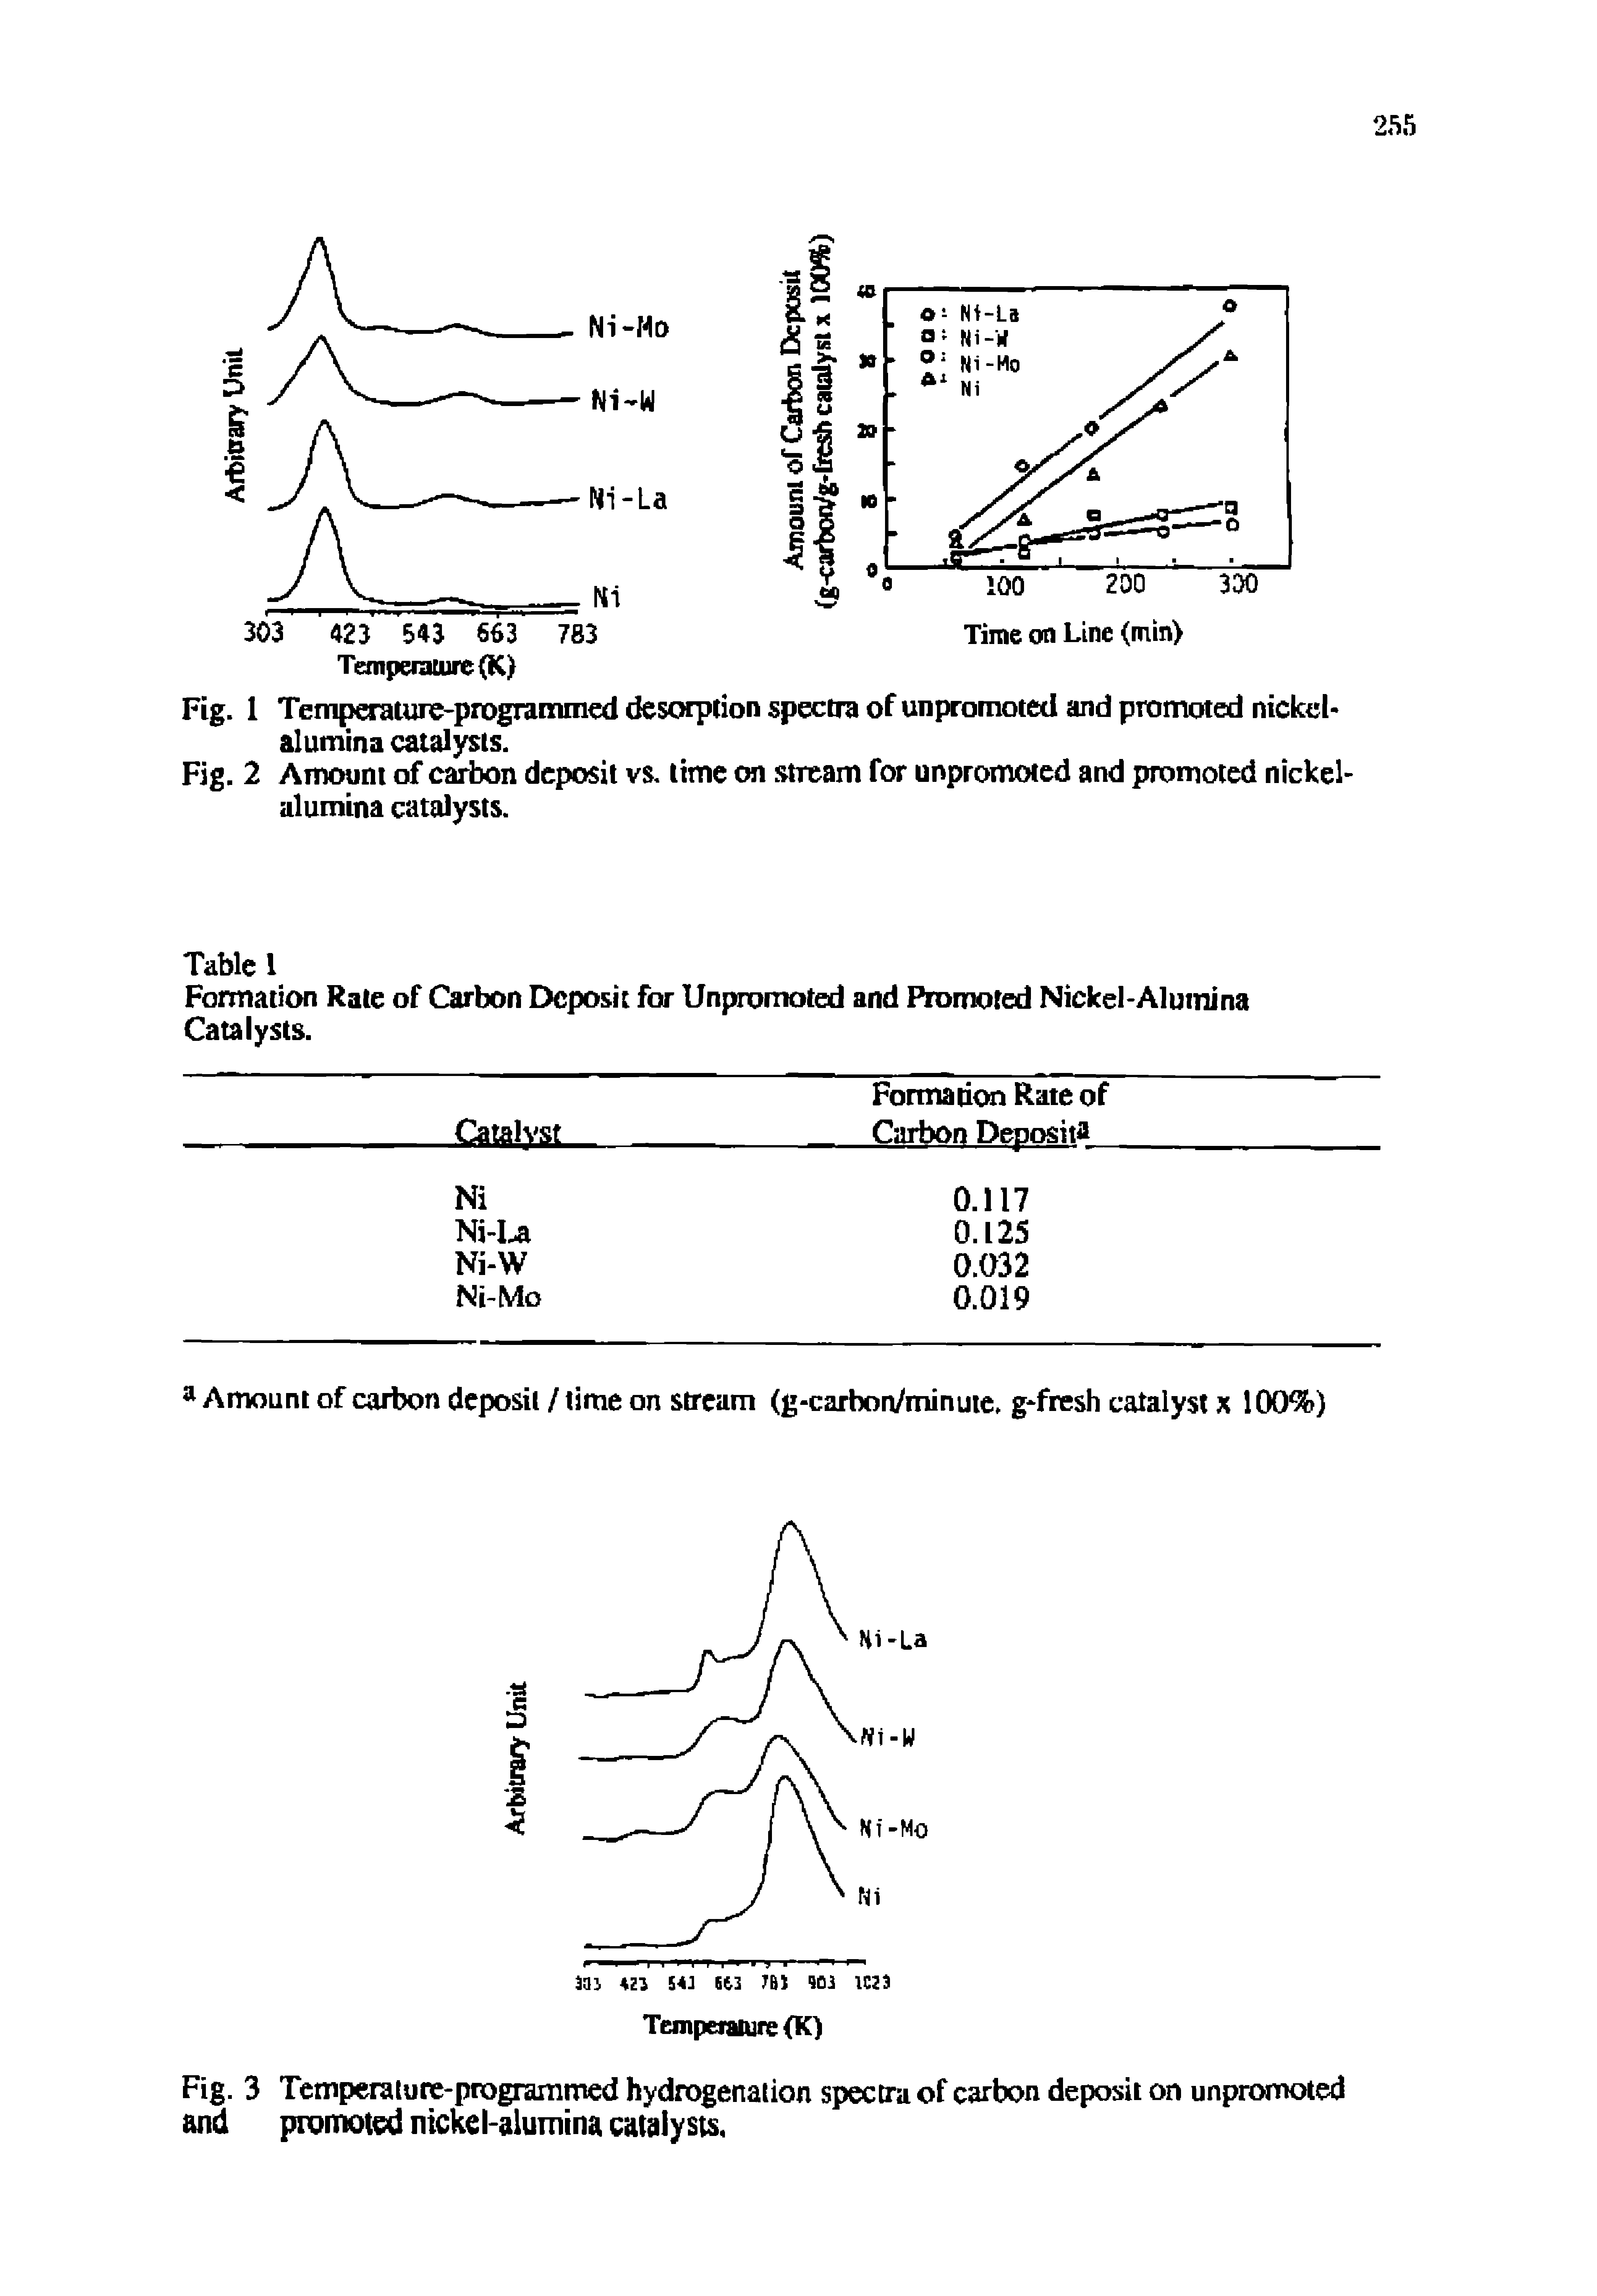 Fig. 1 Temperature-programnicd descKption spectra of unpromoted and promoted nickel-alumina catalysts.